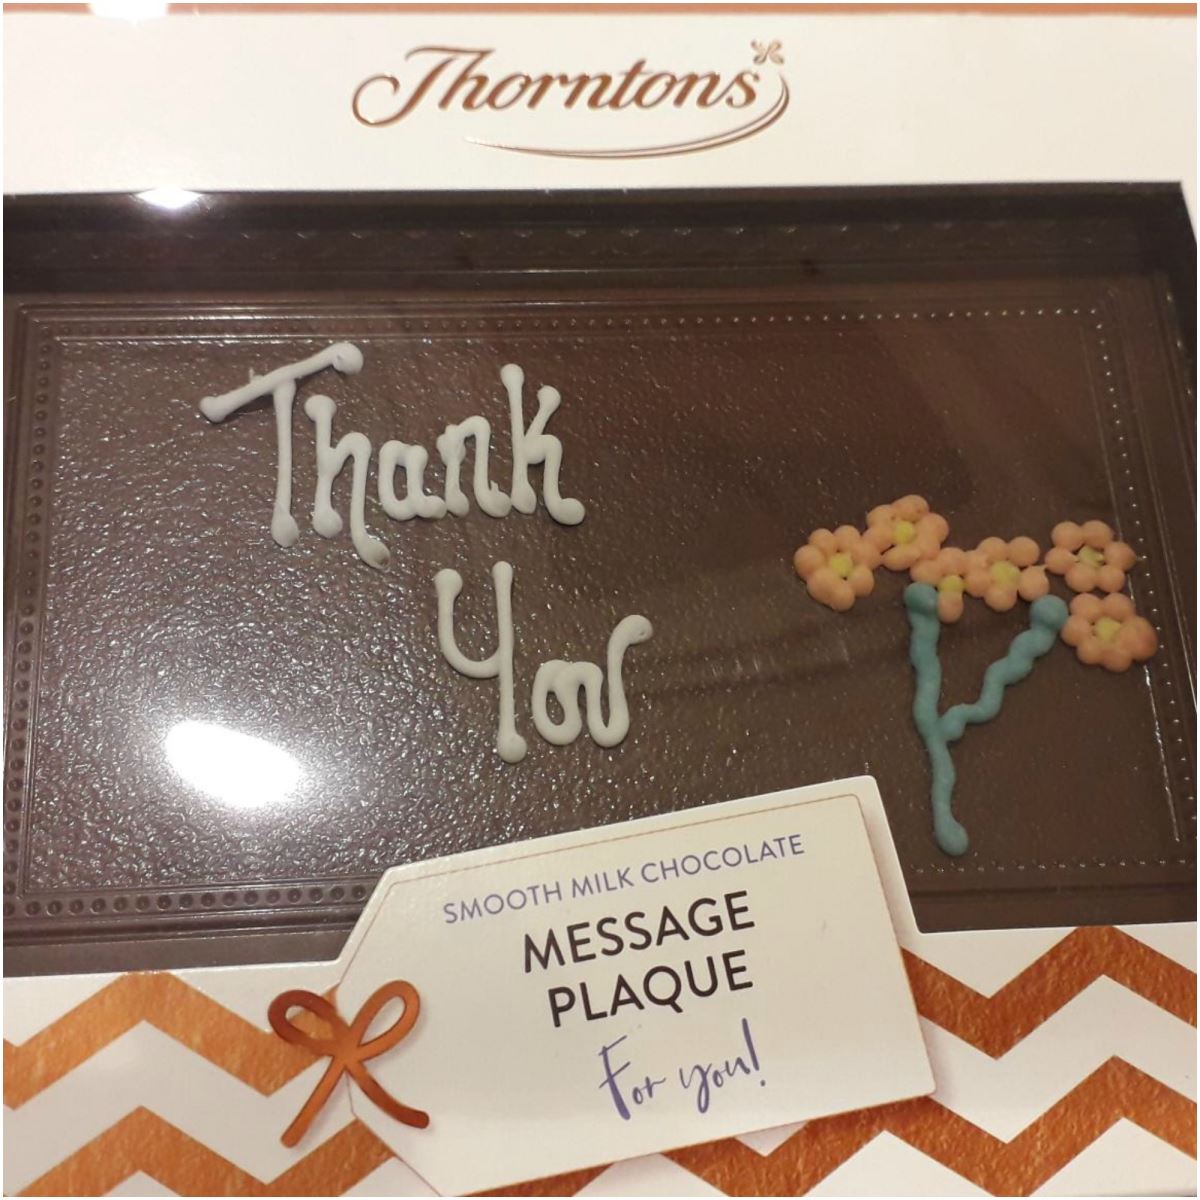 Thorntons chocolate gifts